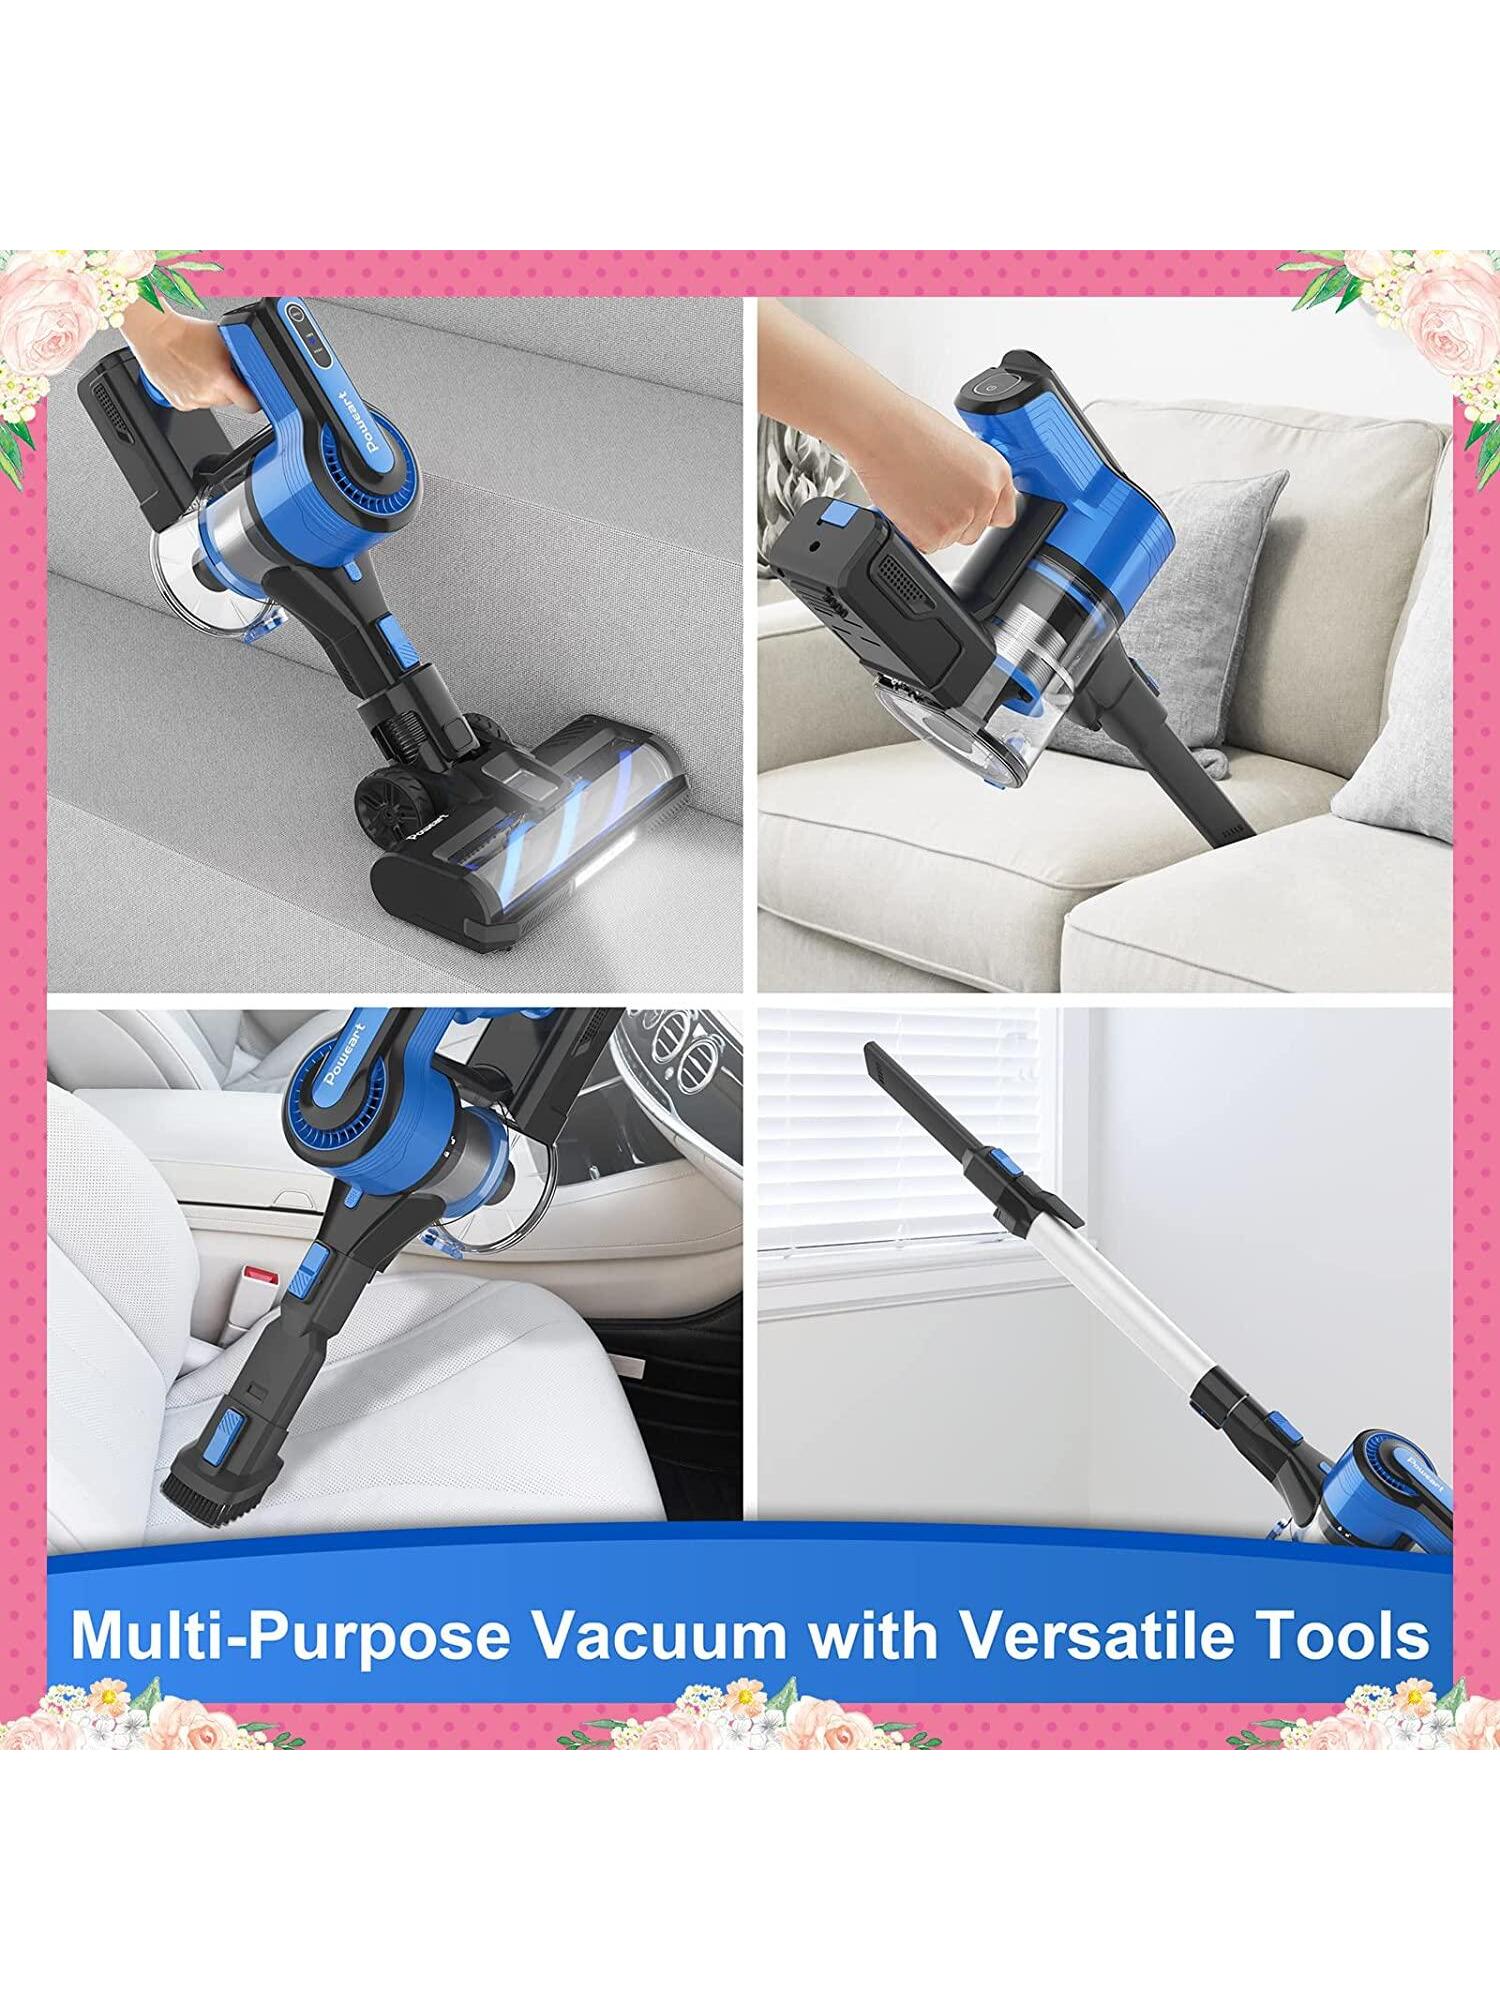 POWEART Cordless Vacuum Cleaner, 26Kpa 350W Powerful Stick Vacuum, 8 in 1 Self-Standing Rechargeable Battery Vacuum Up to 45min Runtime, Lightweight Cordless Vacuum for Pet Hair Hard Floor Carpet